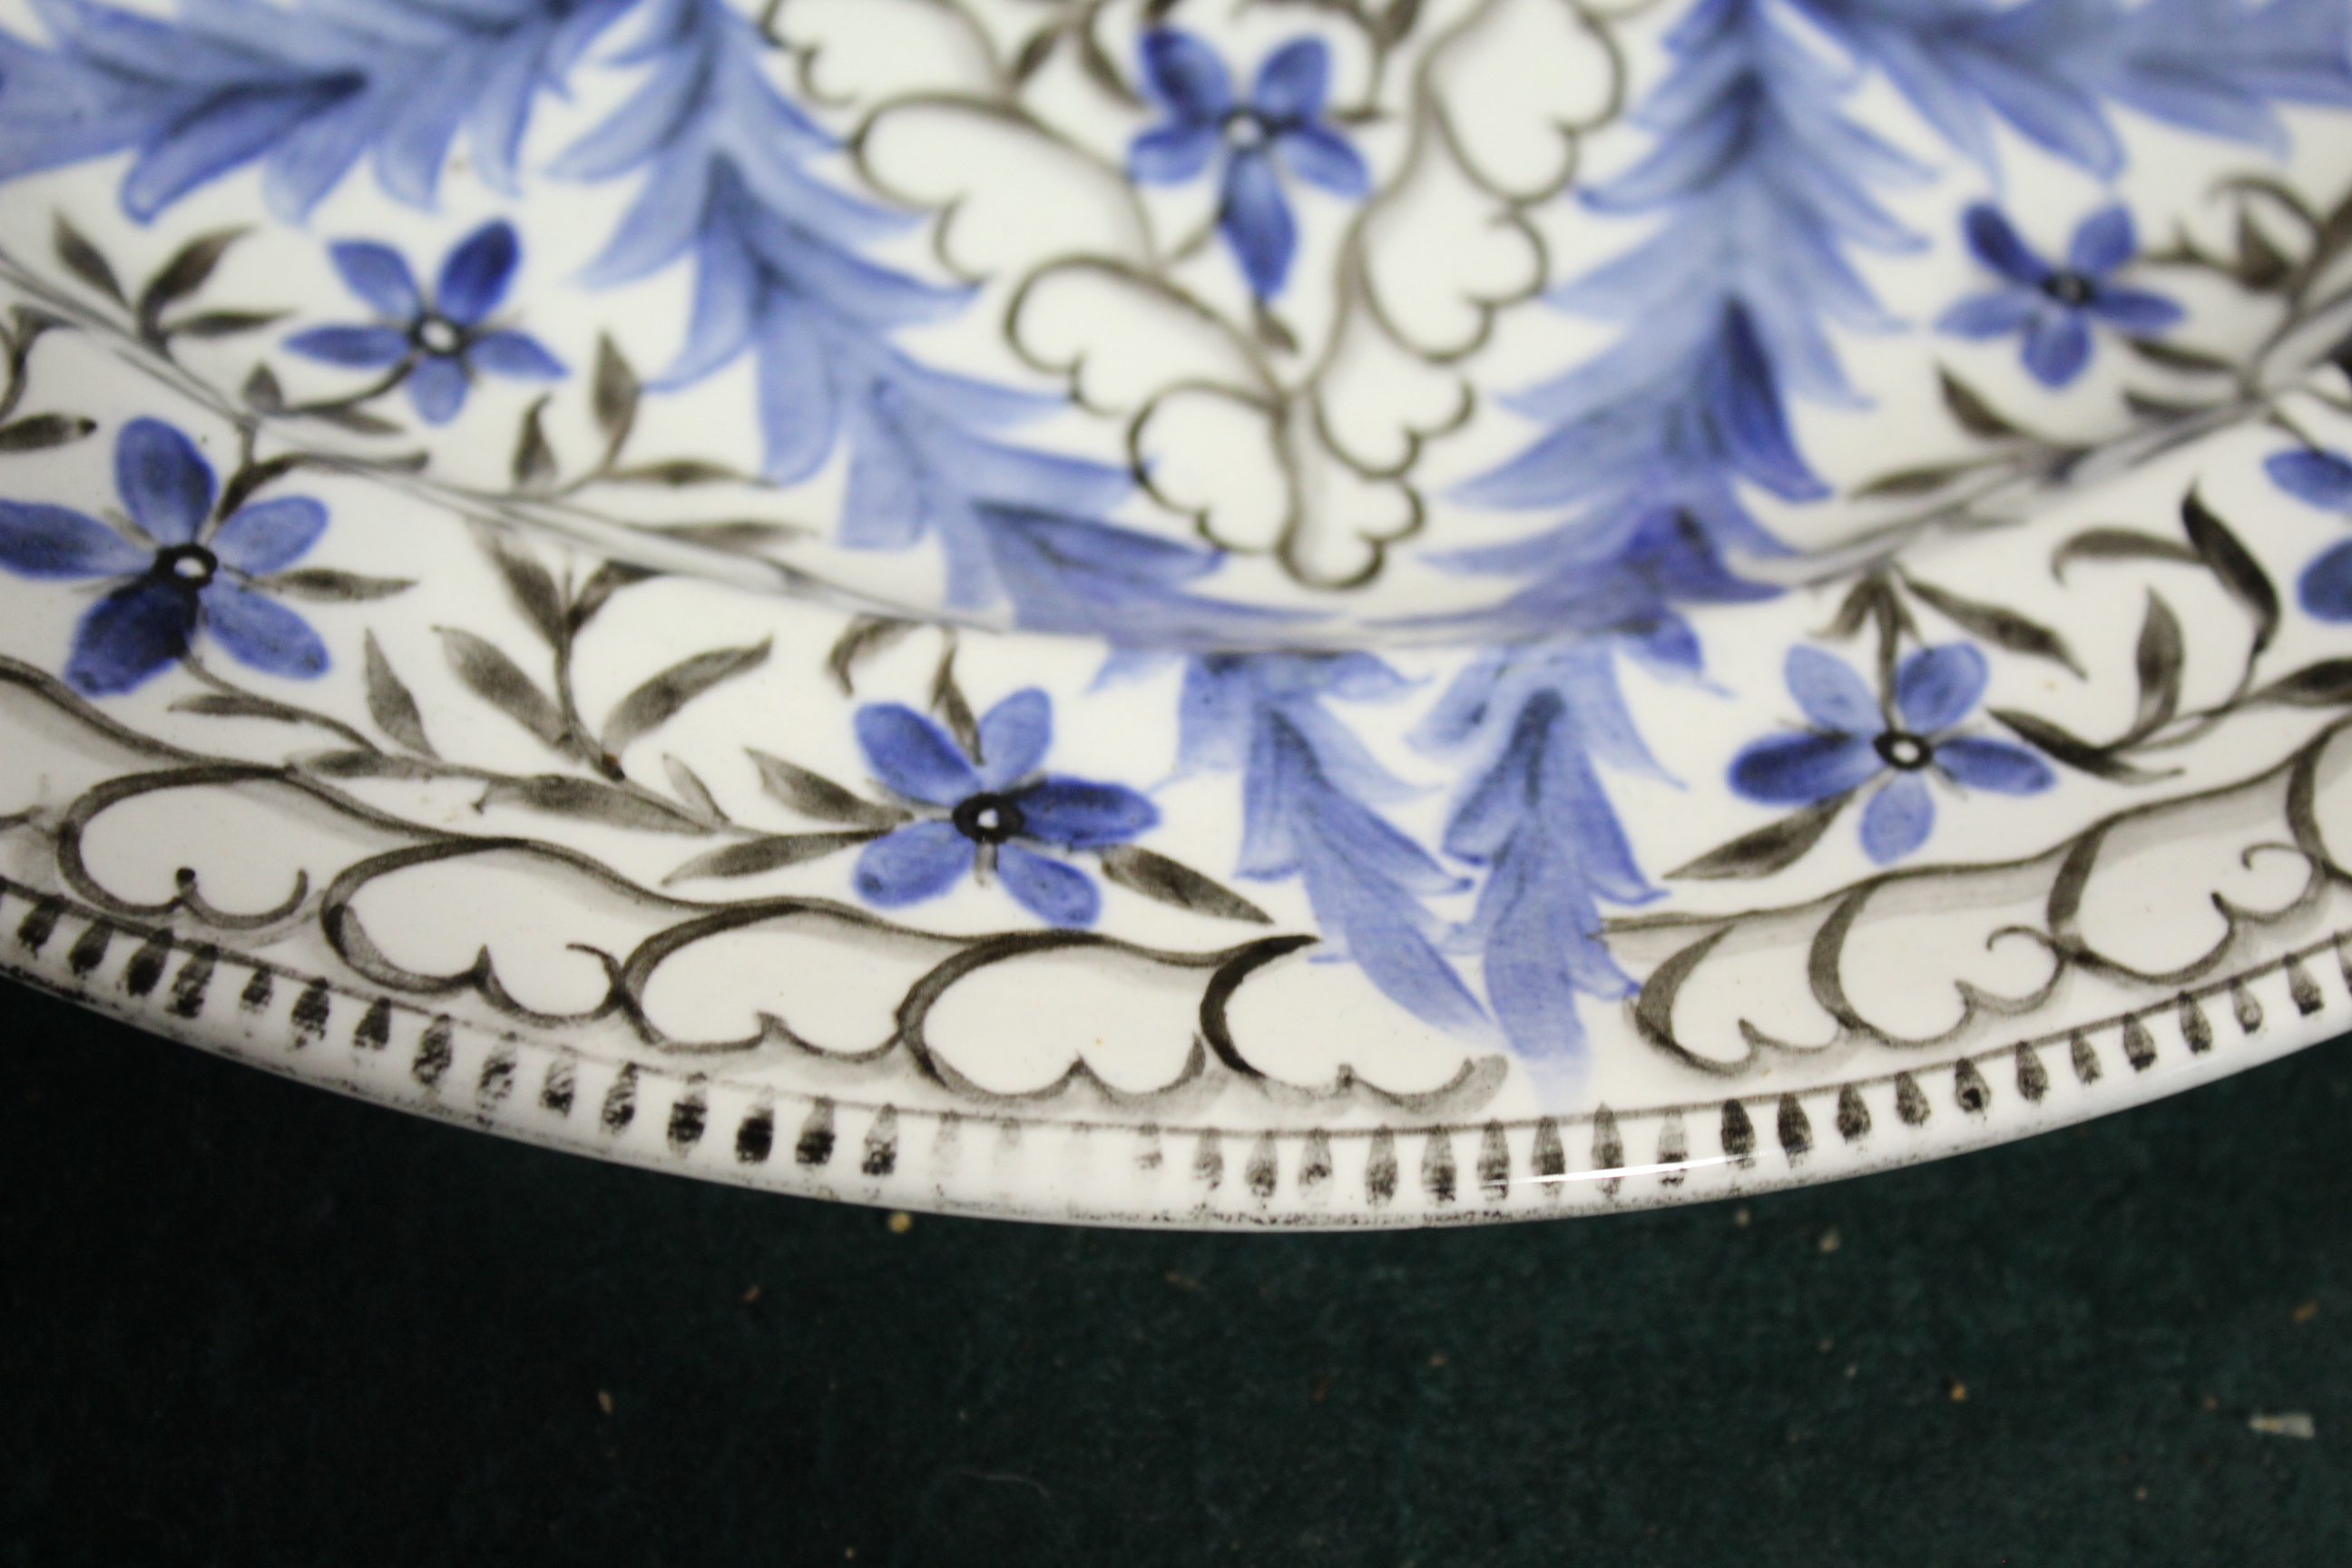 WEDGWOOD POTTERY DISH - LOUISE POWELL the large dish painted with a star shaped motif in the centre, - Image 9 of 11